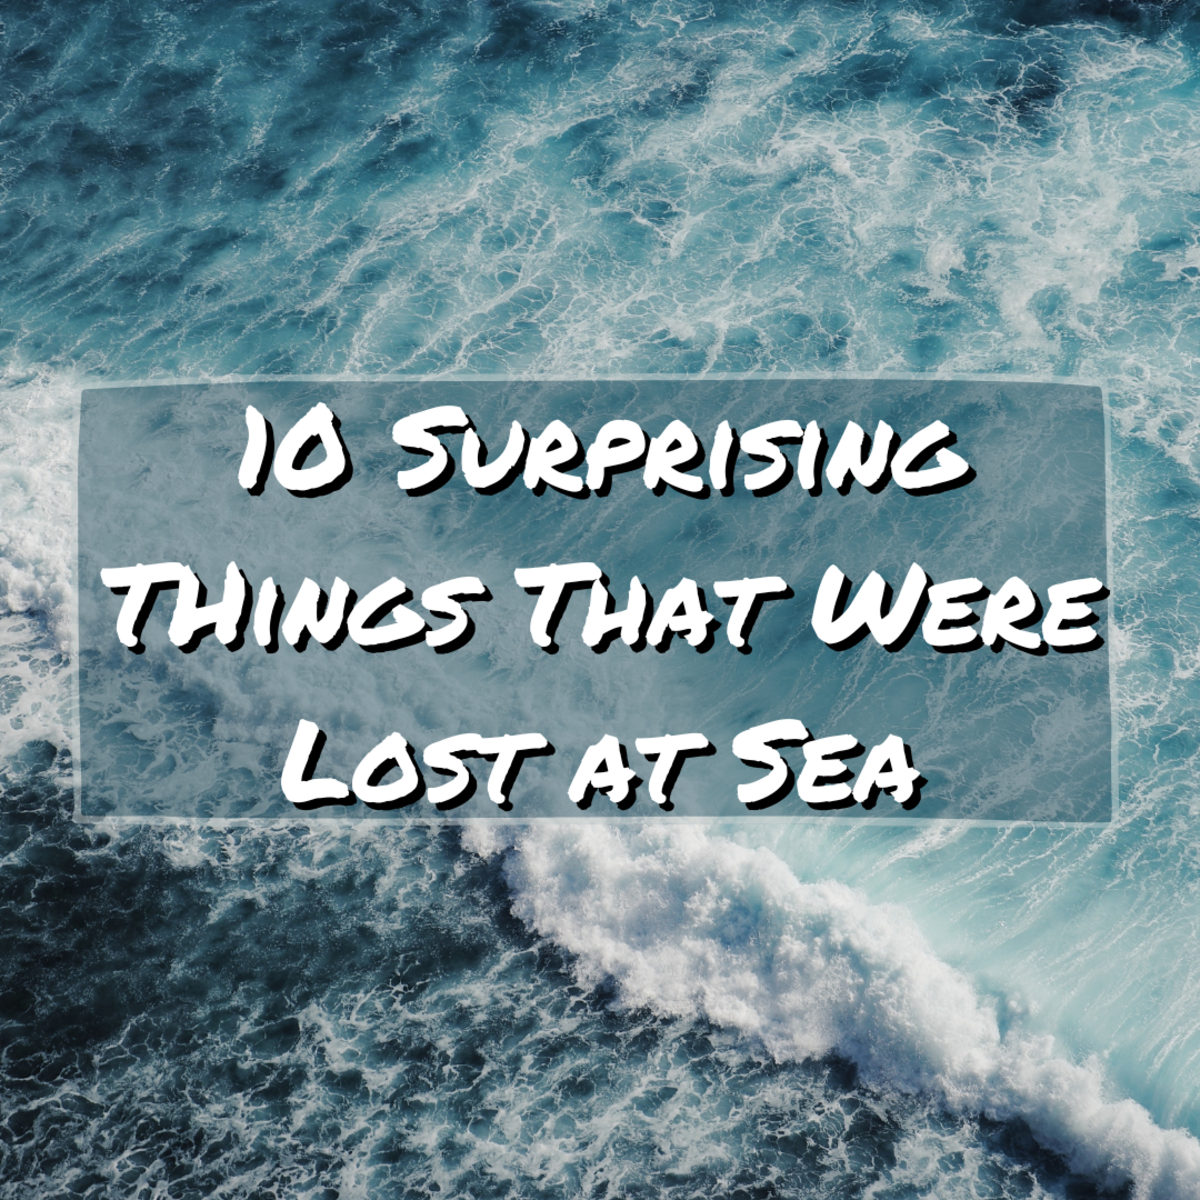 10 Surprising Things That Were Lost at Sea